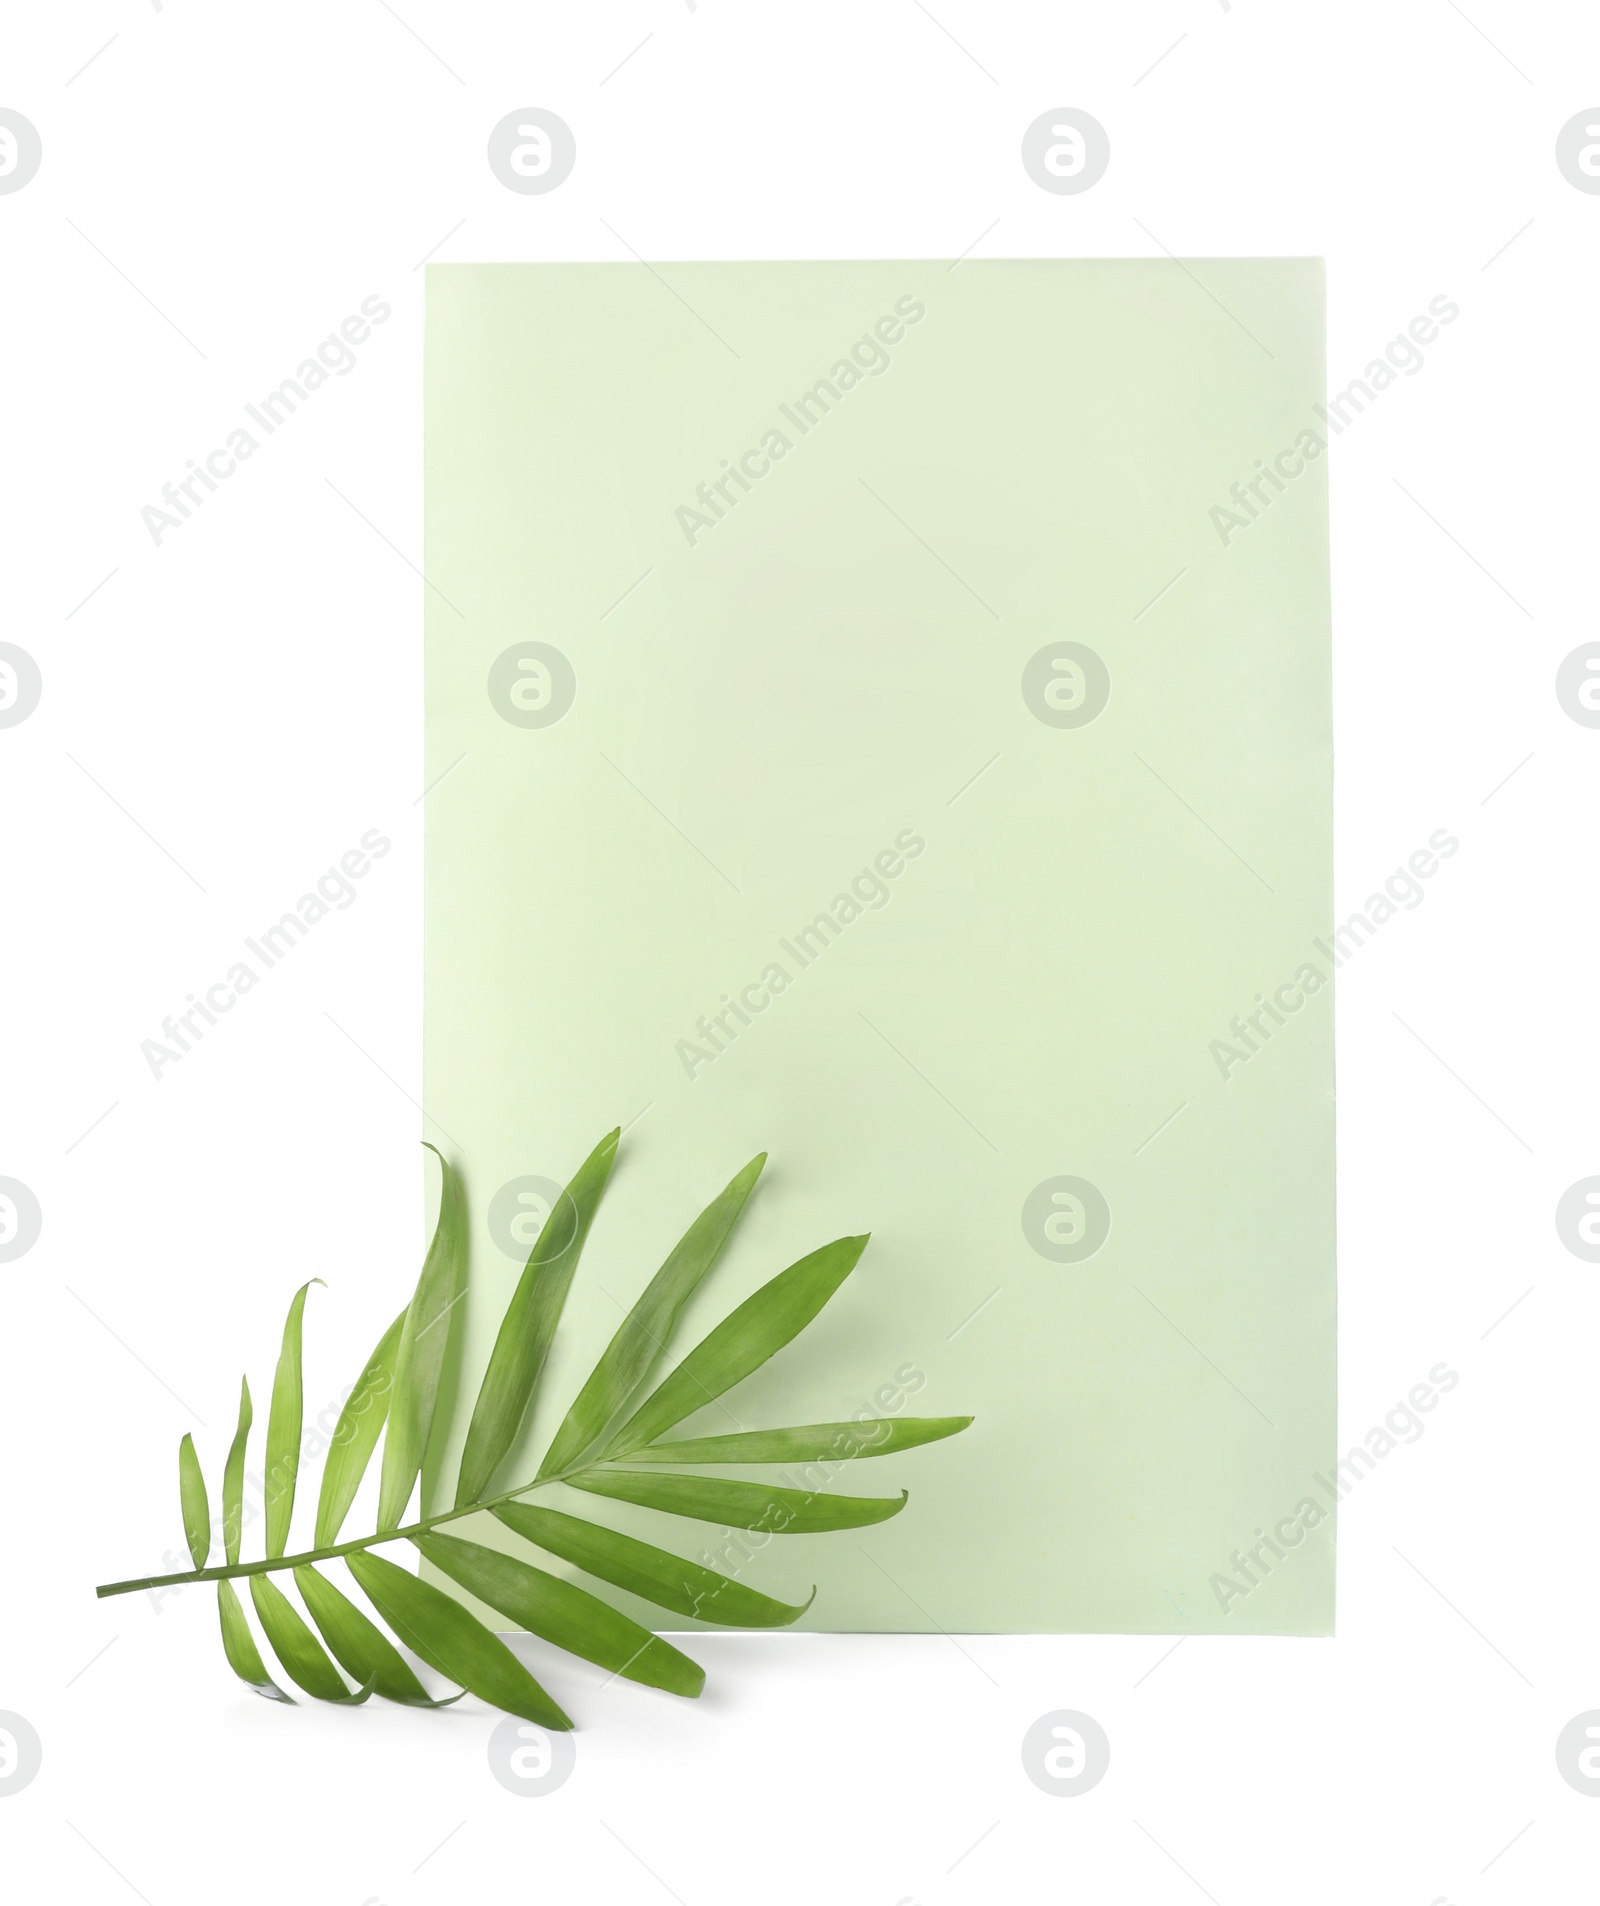 Photo of Scented sachet and green leaf on white background